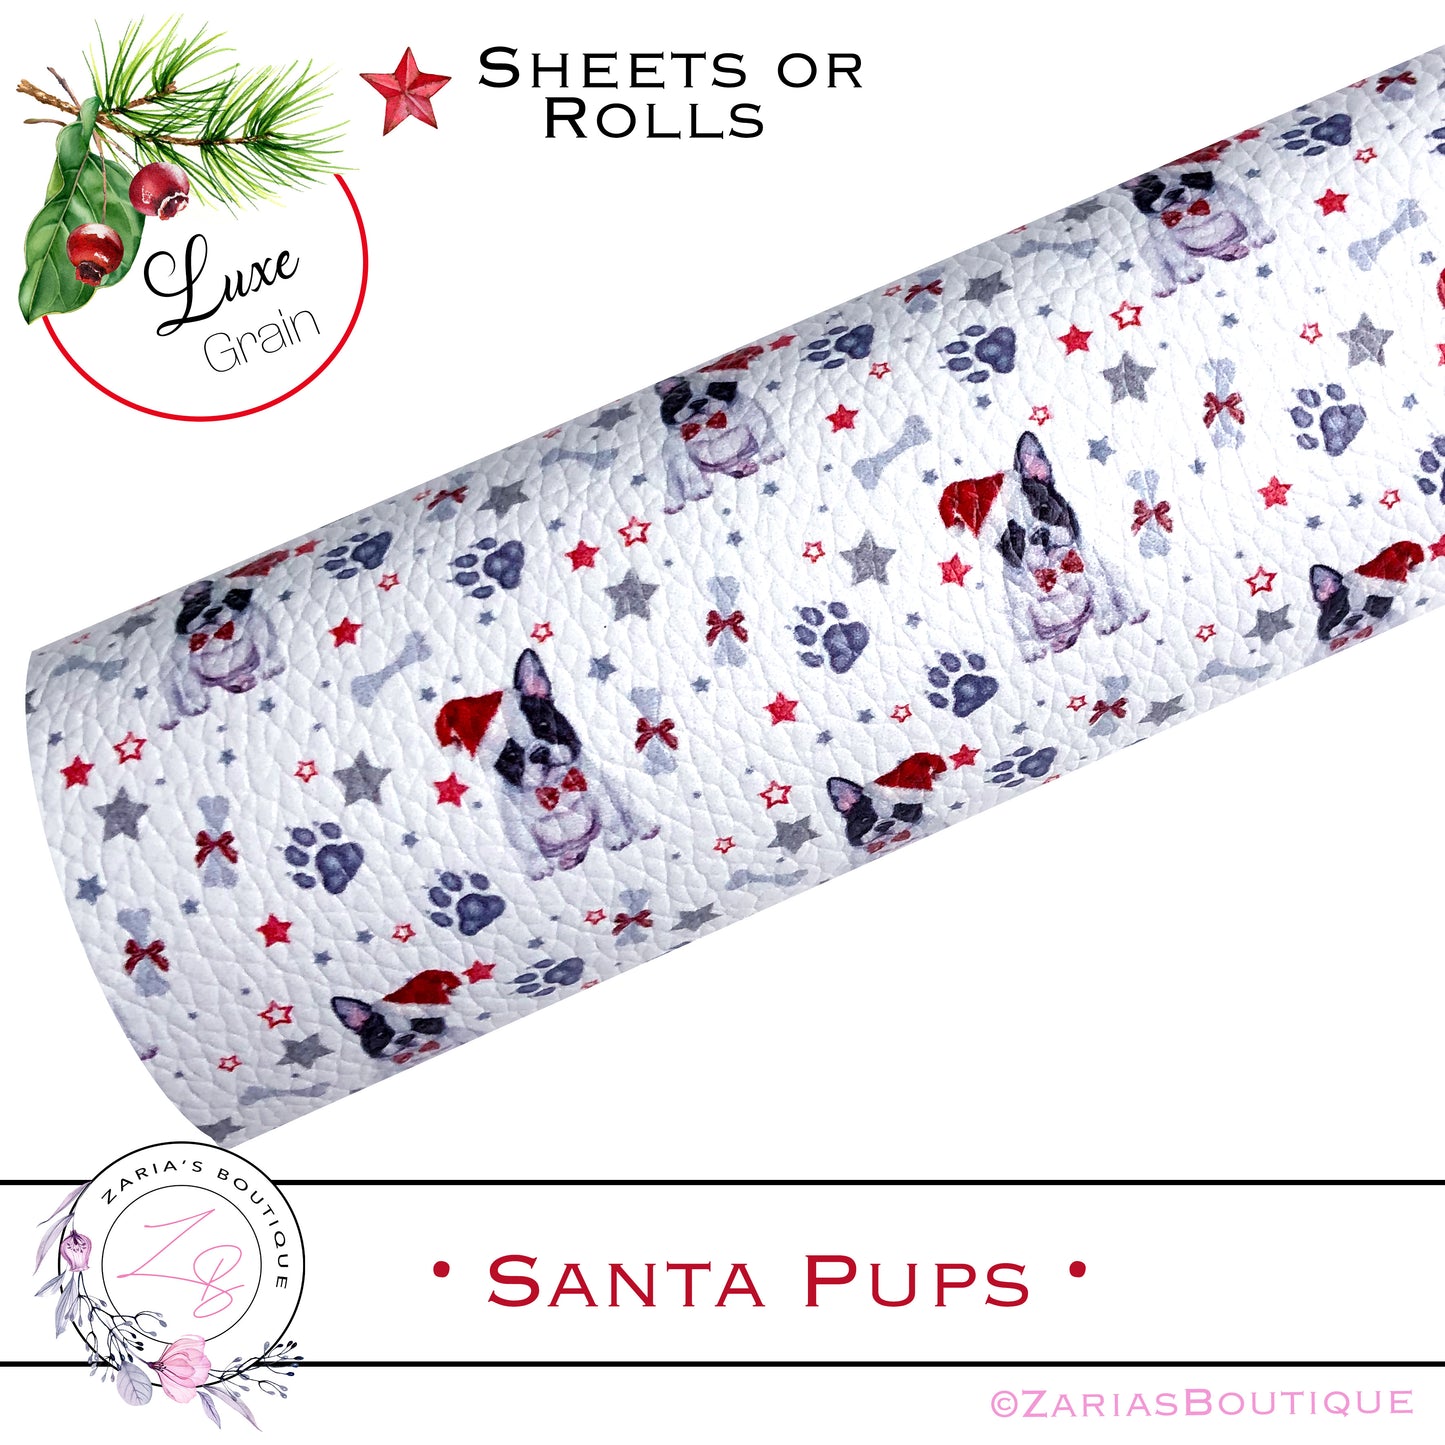 ⋅  Christmas Santa Pups ⋅ Luxe Vegan Faux Leather ⋅ Sheets or Rolls! ⋅